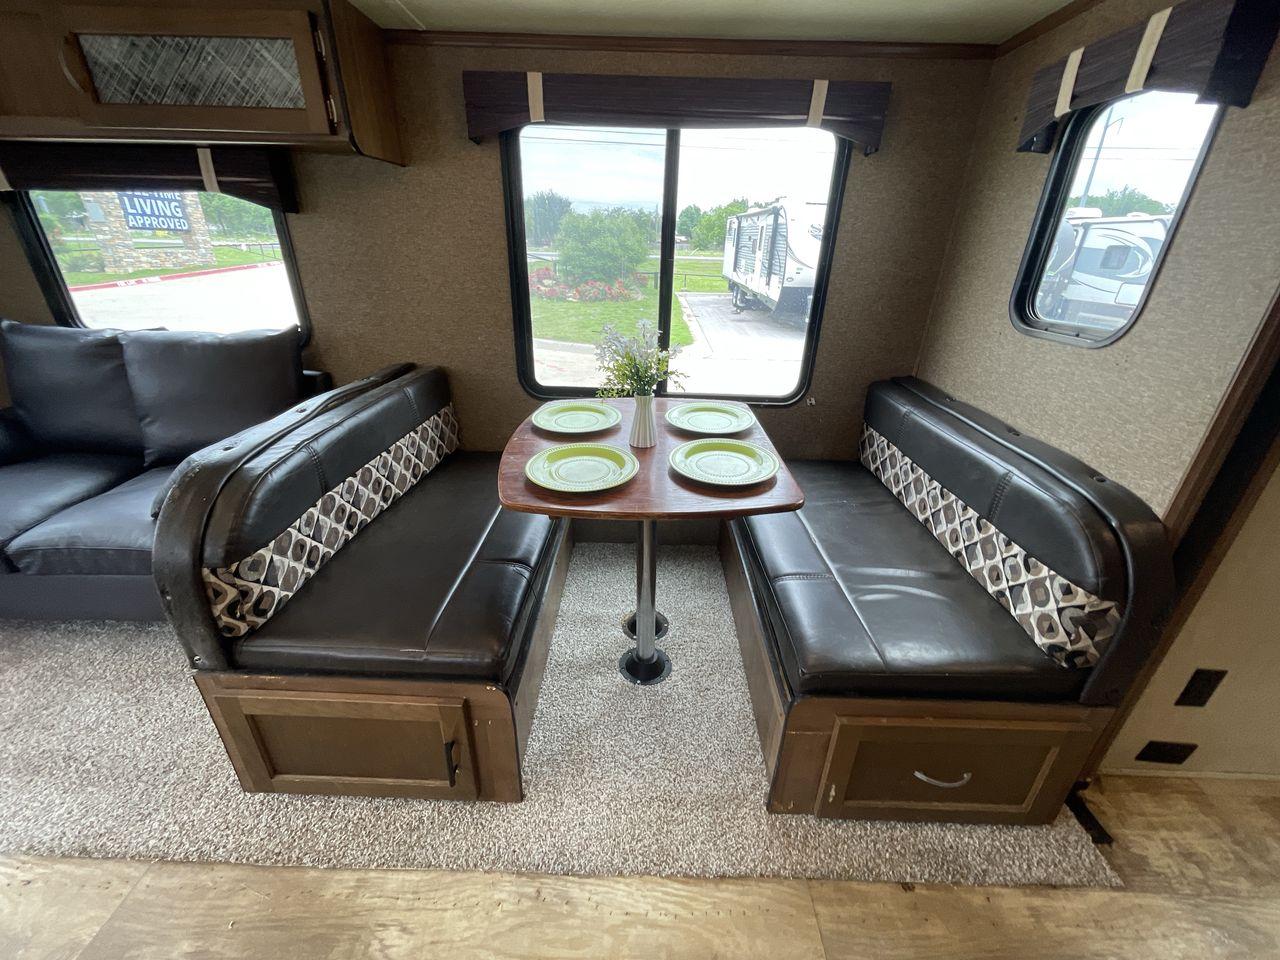 2018 GULFSTREAM TRAILMASTER 262RLS (1NL1GTP2XJ1) , Length: 31.25 ft. | Dry Weight: 6,849 lbs. | Slides: 1 transmission, located at 4319 N Main Street, Cleburne, TX, 76033, (817) 221-0660, 32.435829, -97.384178 - This 2018 Gulf Stream Trailmaster 262RLS travel trailer measures just over 31' in length. It is a dual axle, steel wheel setup with a dry weight of 6,849 lbs and a carrying capacity of 1,421 lbs. With a dry weight of 6,849 lbs., the Trailmaster 262RLS offers easy maneuverability without compromising - Photo #14